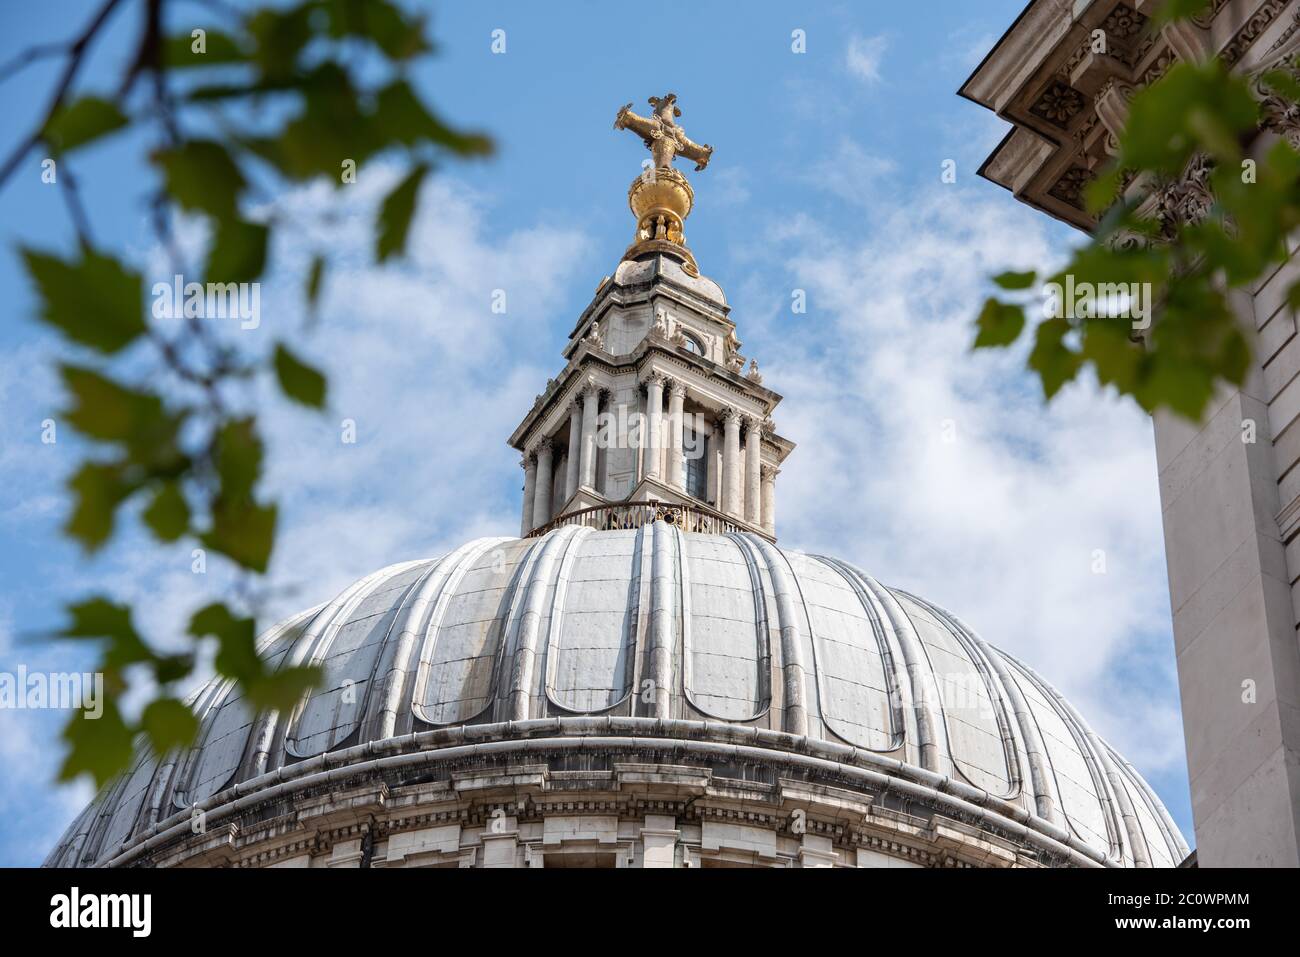 St Paul's Cathedral, London, England. Golden Gallery, above the dome. Stock Photo